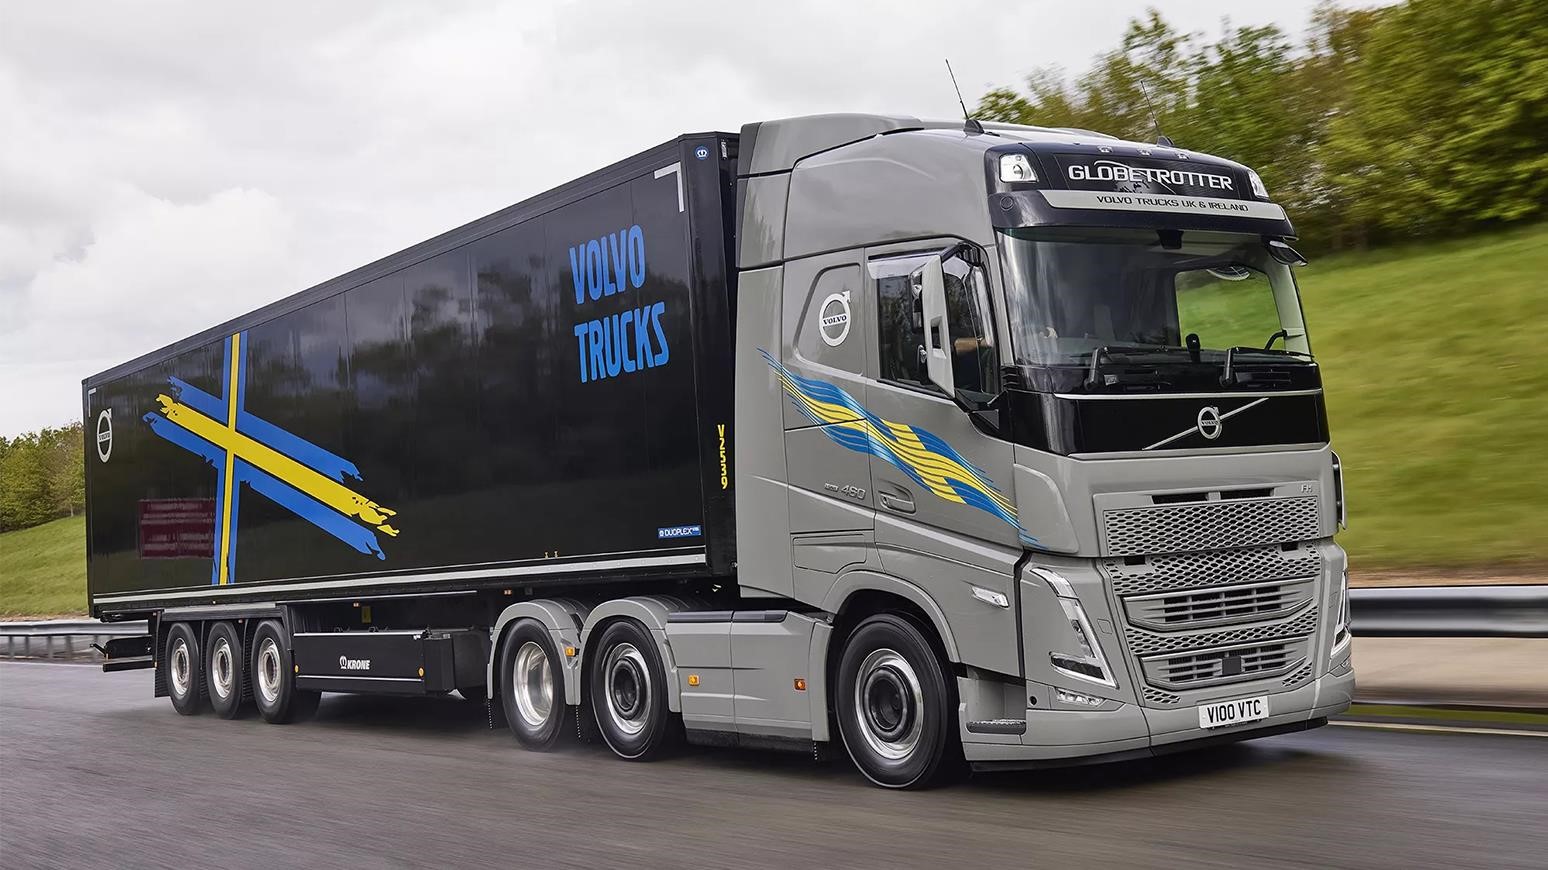 Upgrades To Volvo’s I-Save Technology Further Improve Fuel Efficiency & Driveability